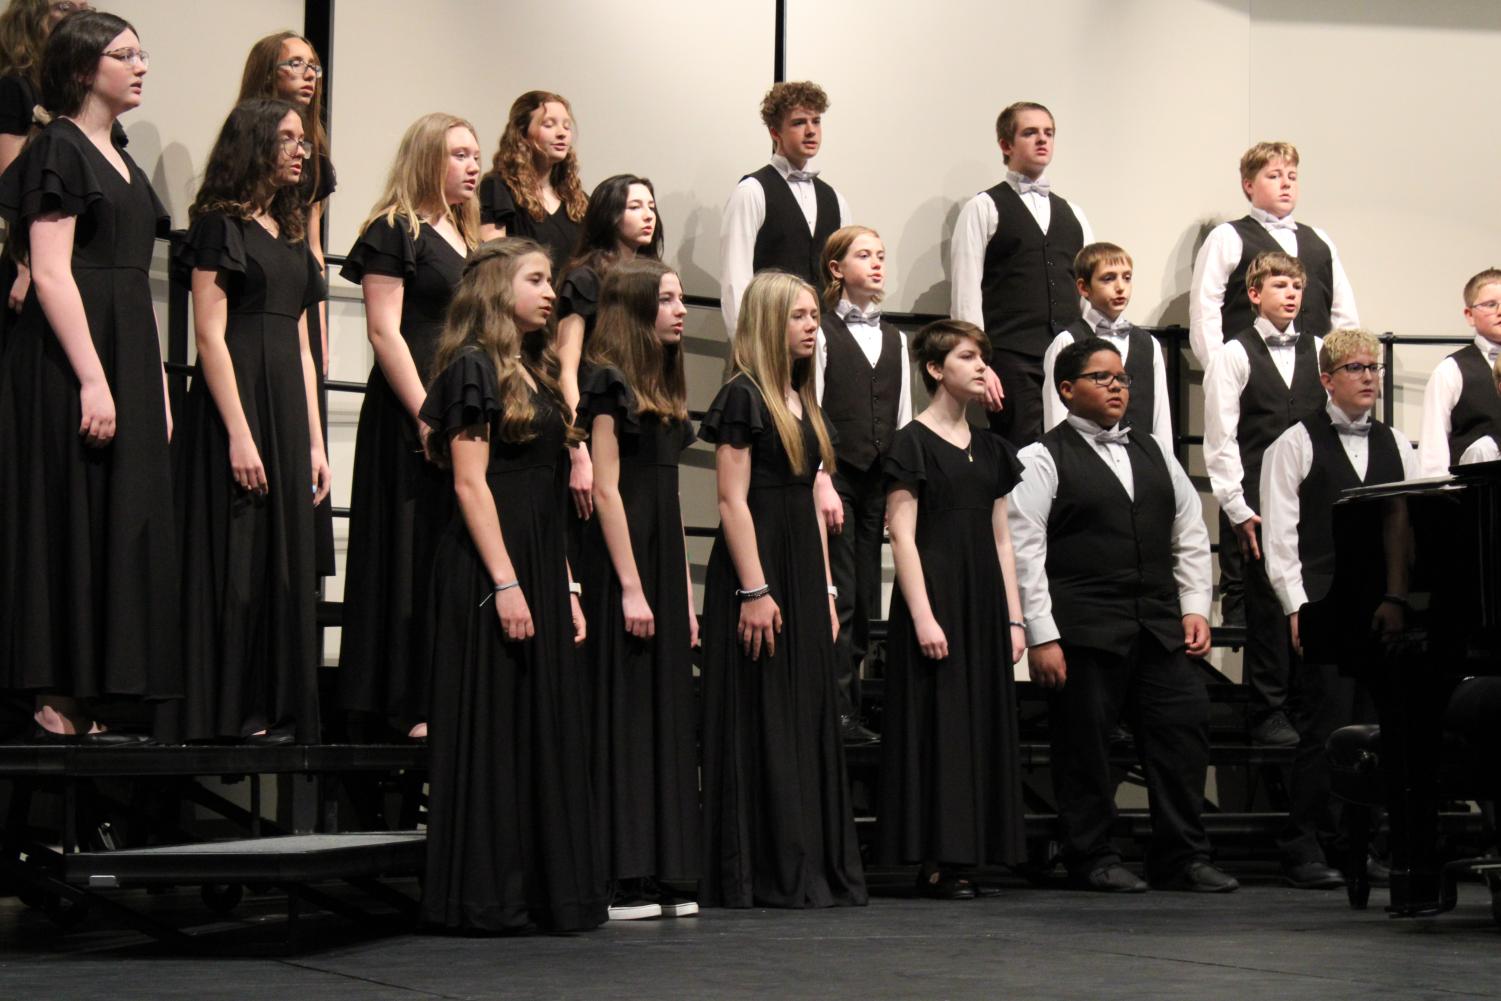 Madrigals+sing+for+Derby+North+choir+students+%28photos+by+Jewel+Hardin%29